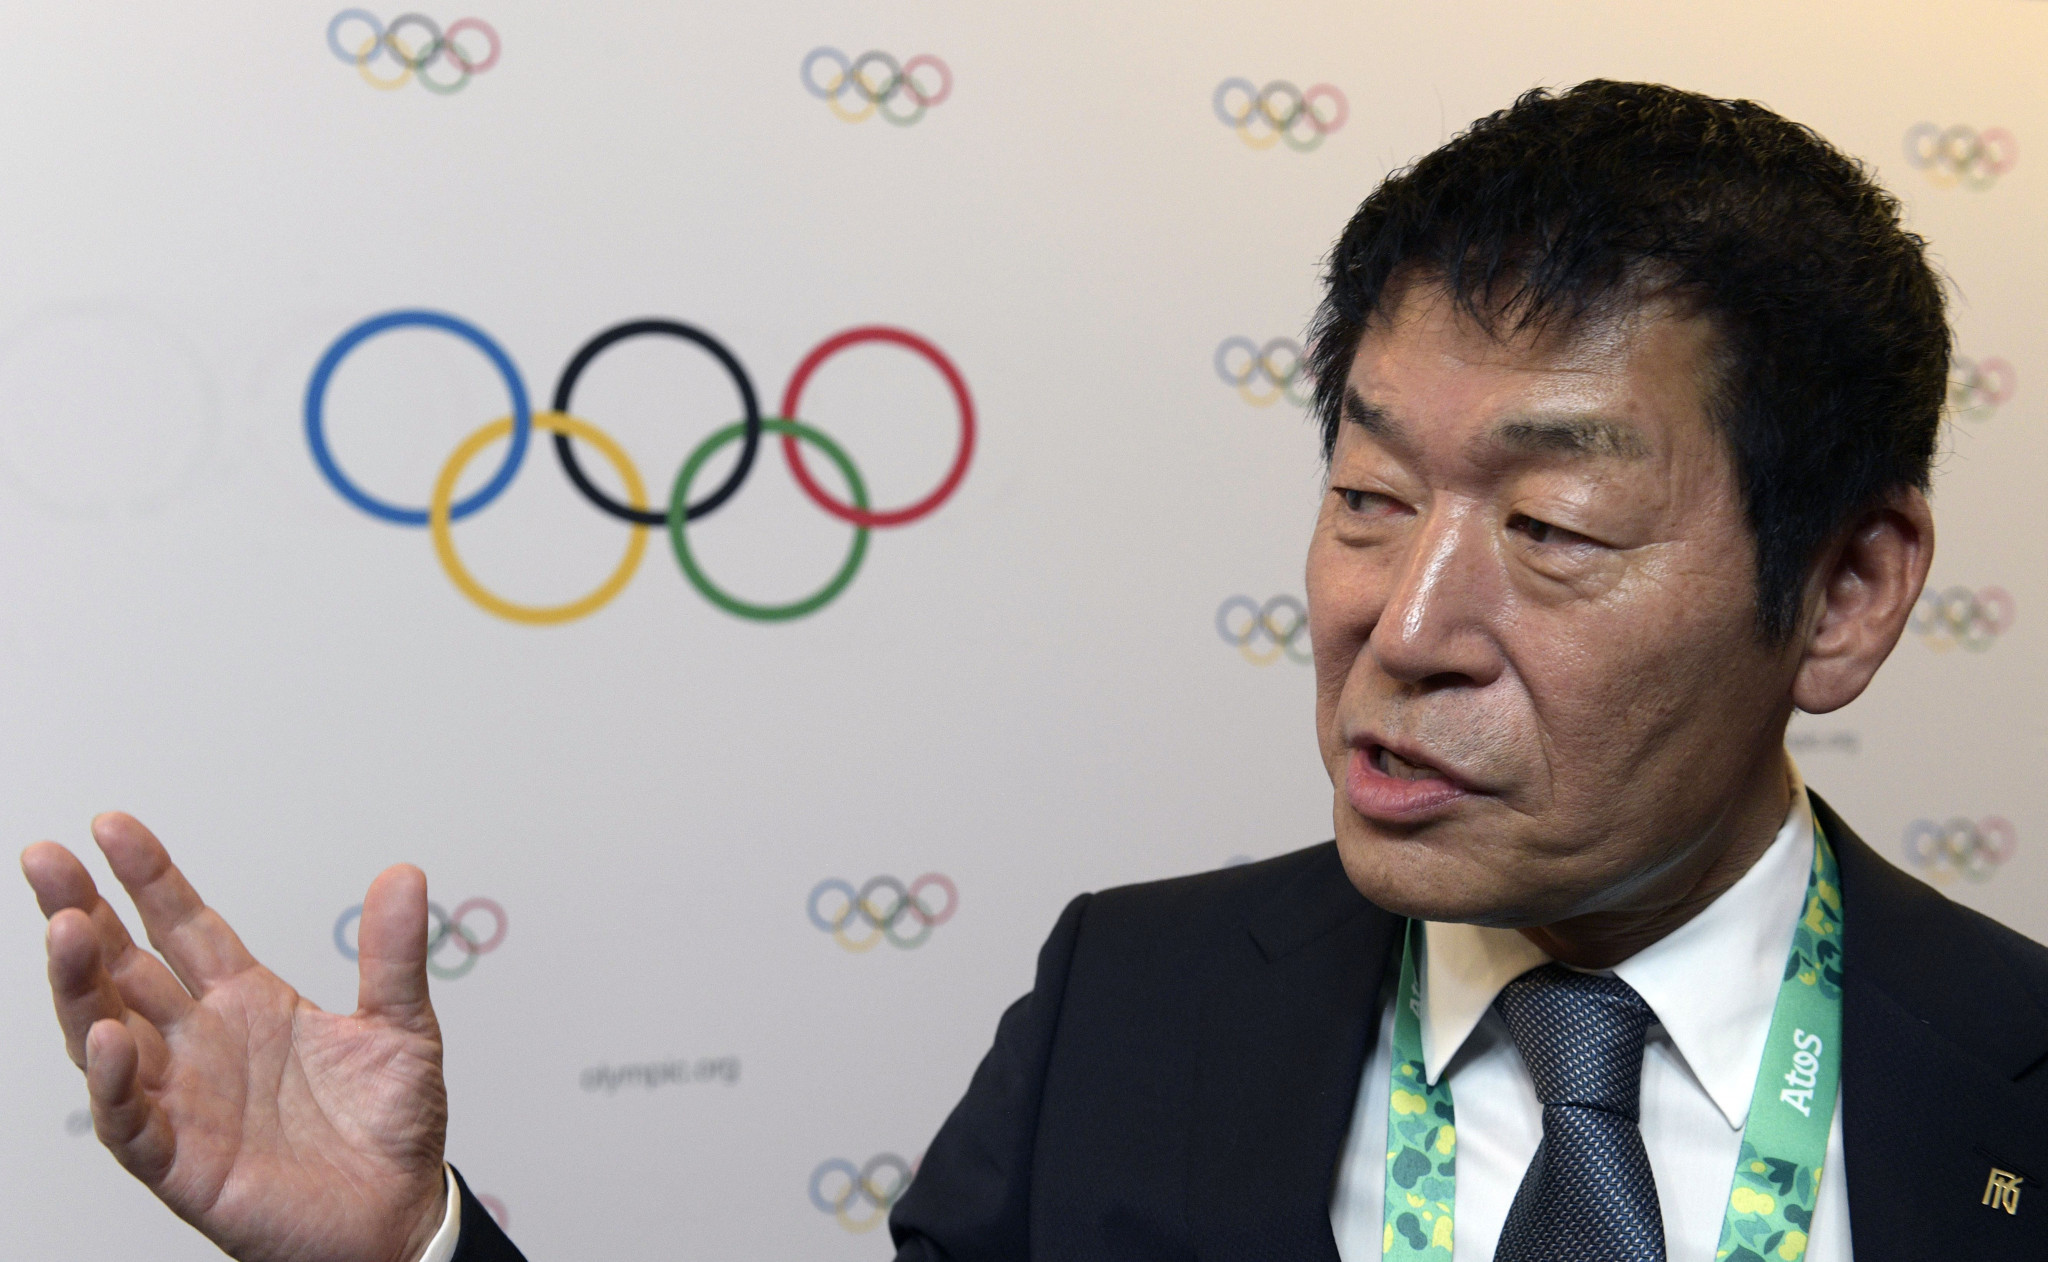 FIG President Morinari Watanabe was among the members elected at the Session today ©Getty Images